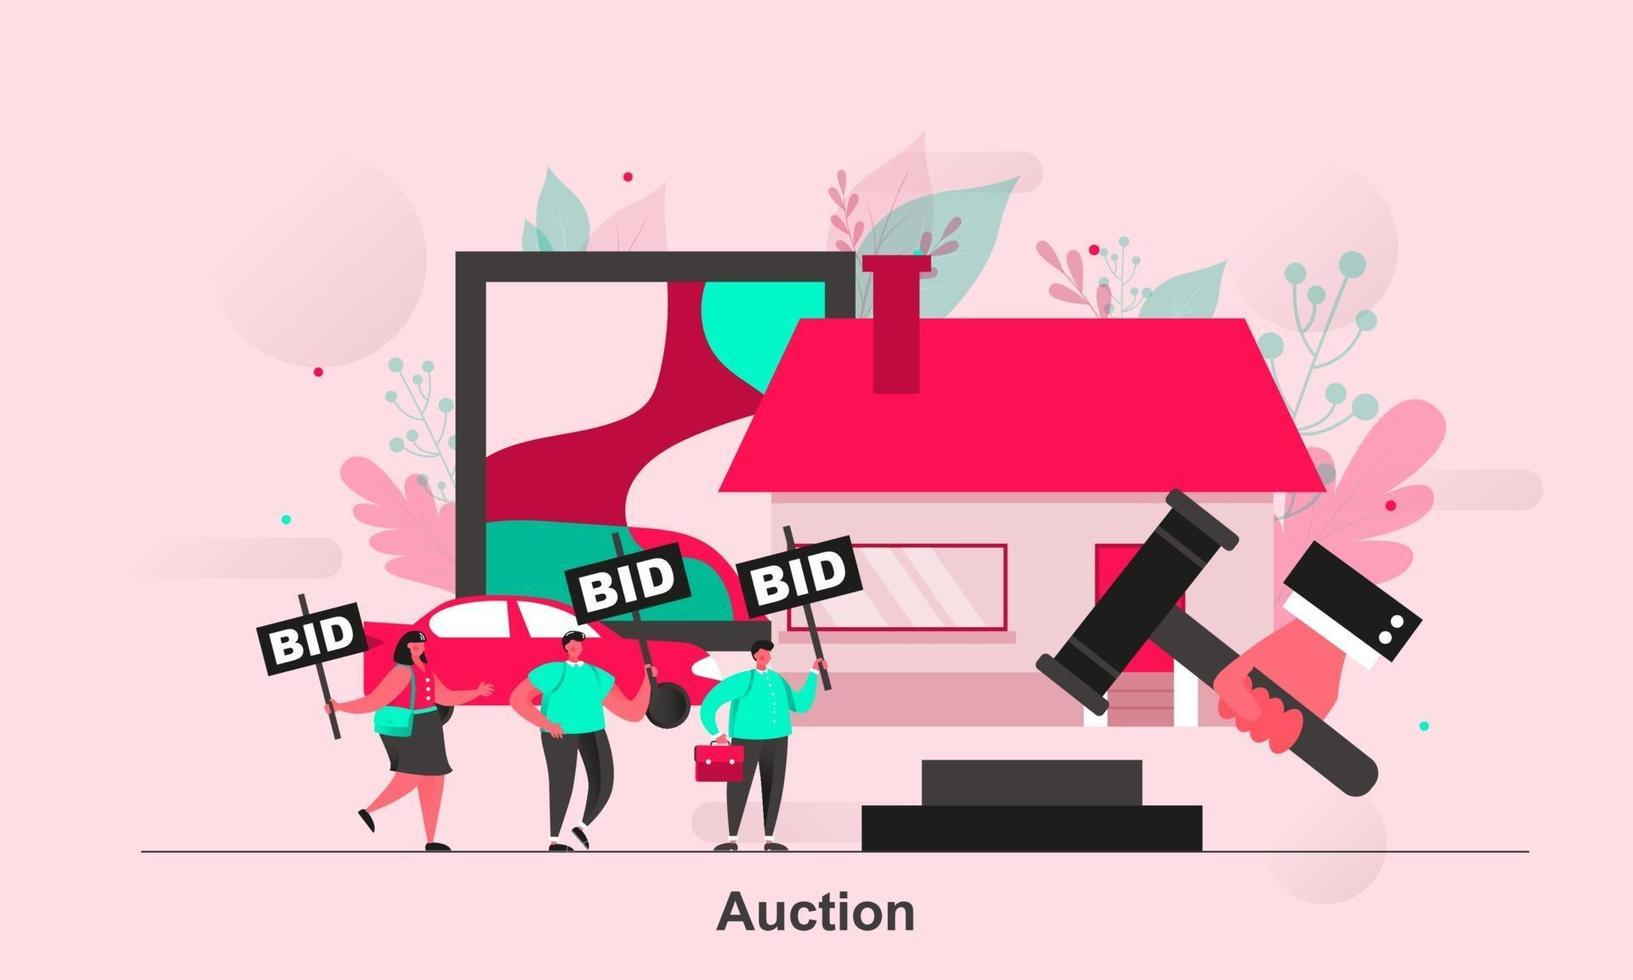 Auction web concept design in flat style vector illustration